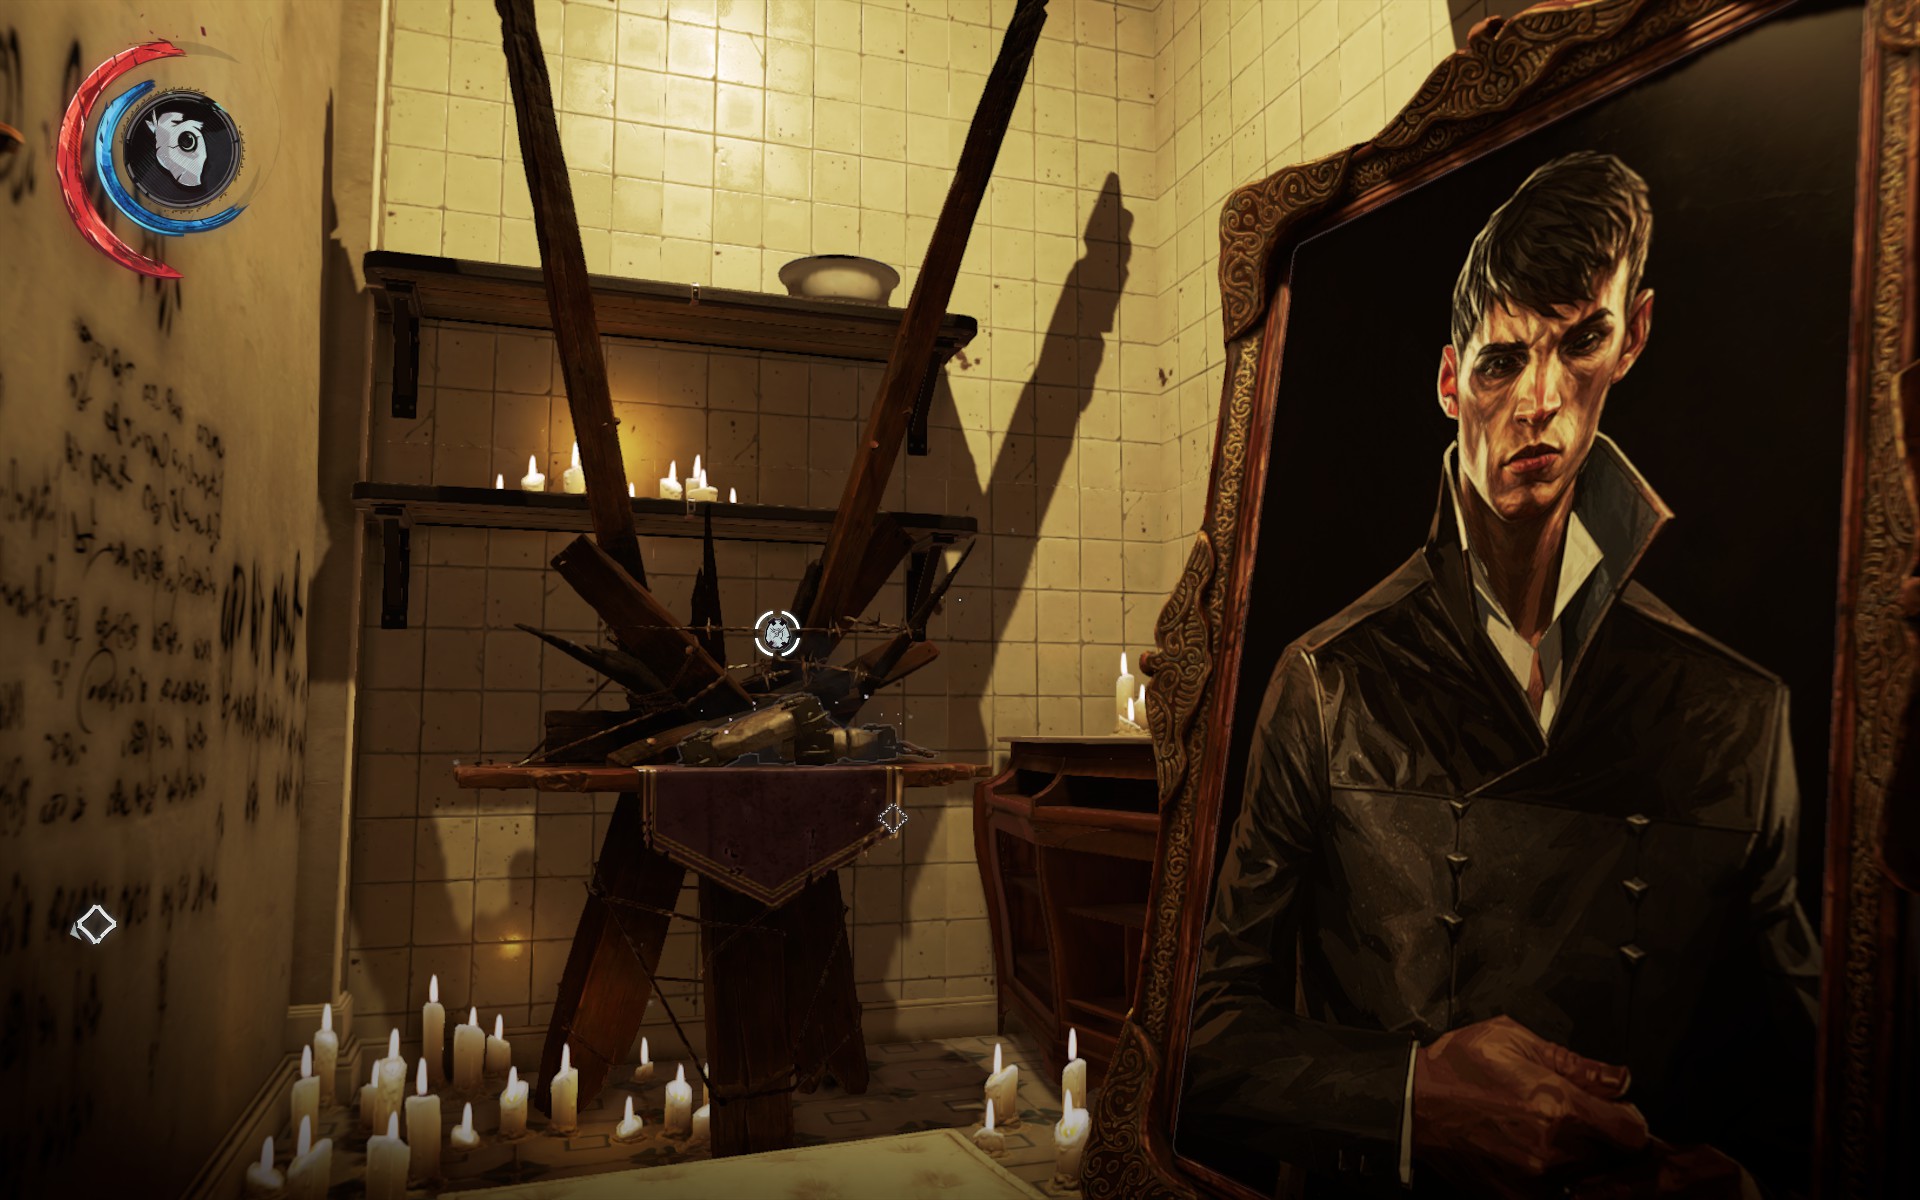 Dishonored 2 Guide/Walkthrough - Part III - The Wall of Light and